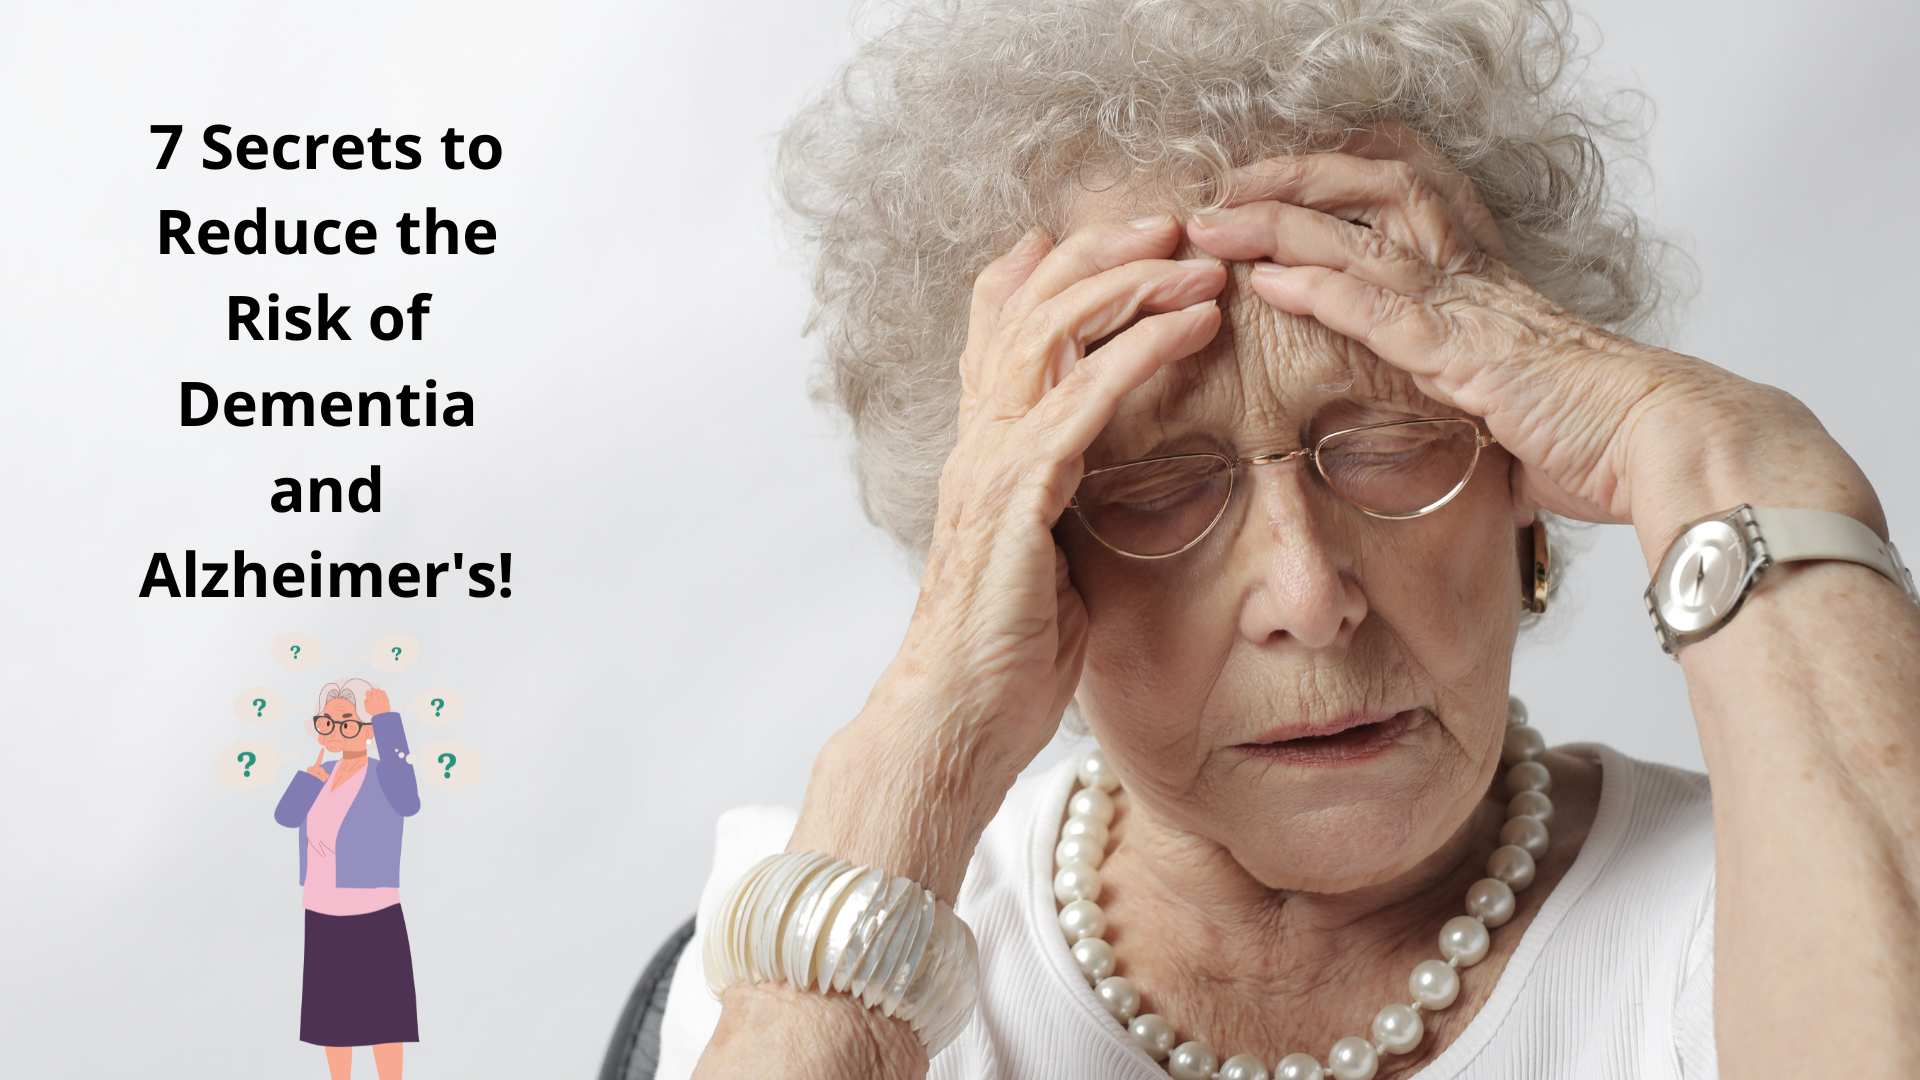 7 Secrets to Reduce the Risk of Dementia and Alzheimer's!